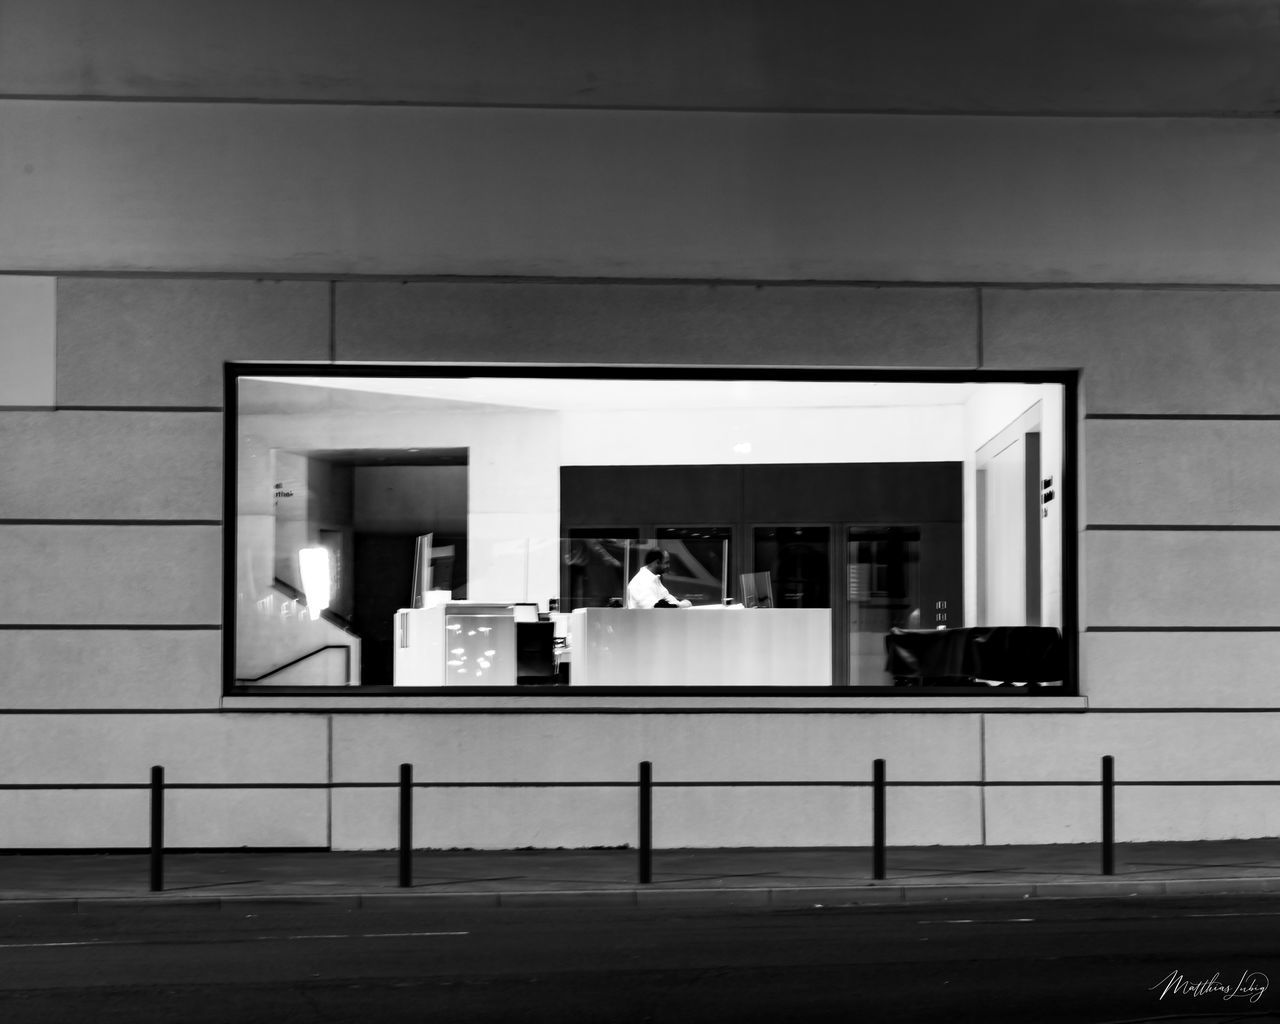 white, black, black and white, monochrome, architecture, monochrome photography, built structure, interior design, light, building exterior, lighting, house, darkness, no people, day, outdoors, lifestyles